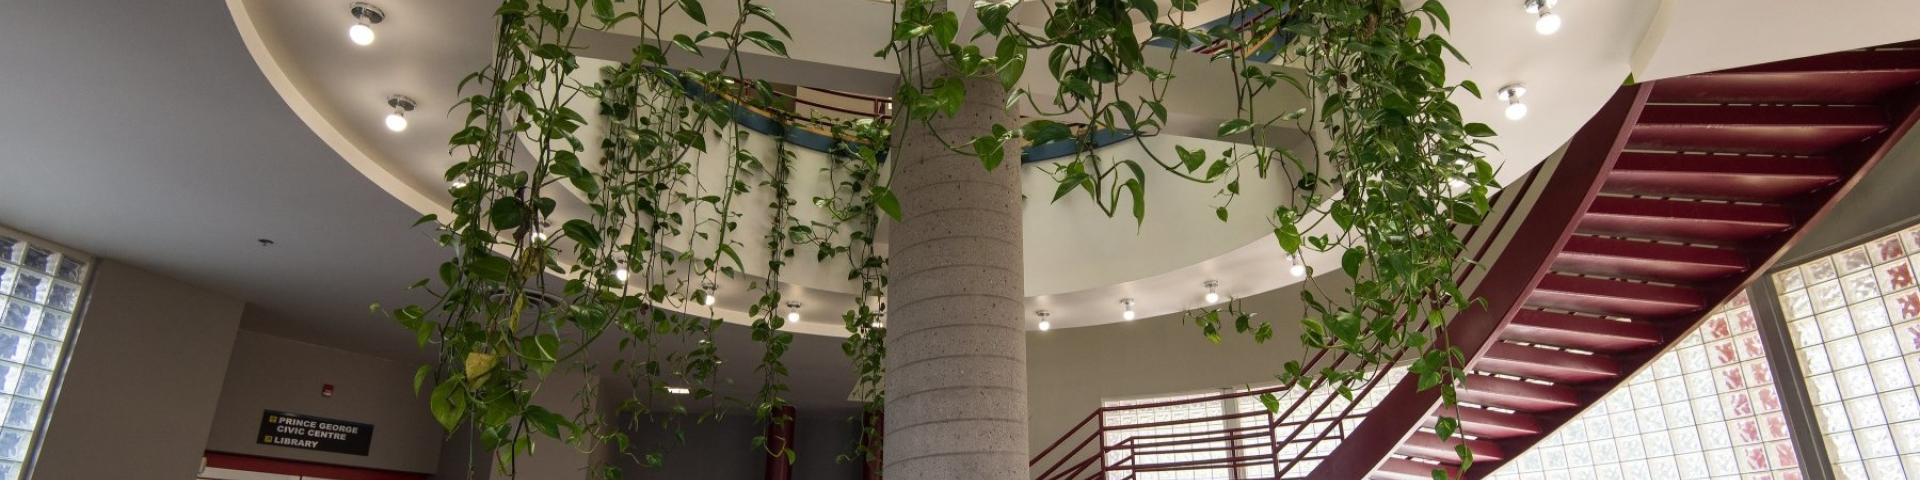 Spiral staircase and ivy hanging from second floor, in the Prince George Conference and Civic Centre lobby area